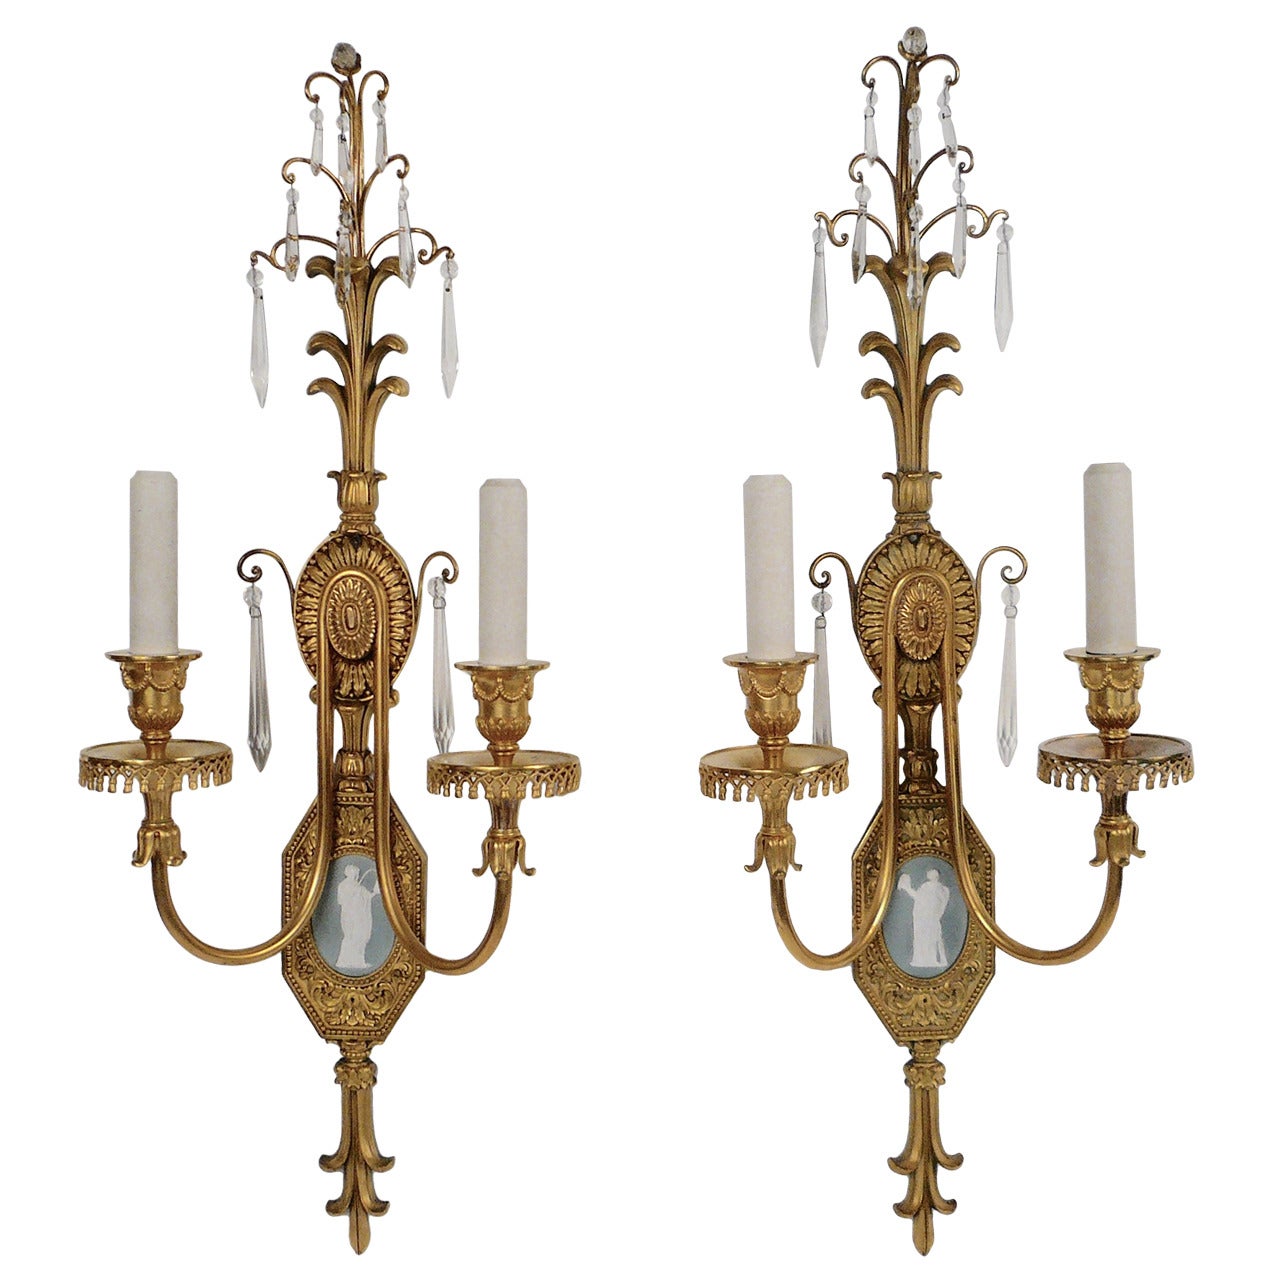 Pair of Adam Style Gilt Bronze Sconces with Enamel Plaques, by E.F. Caldwell